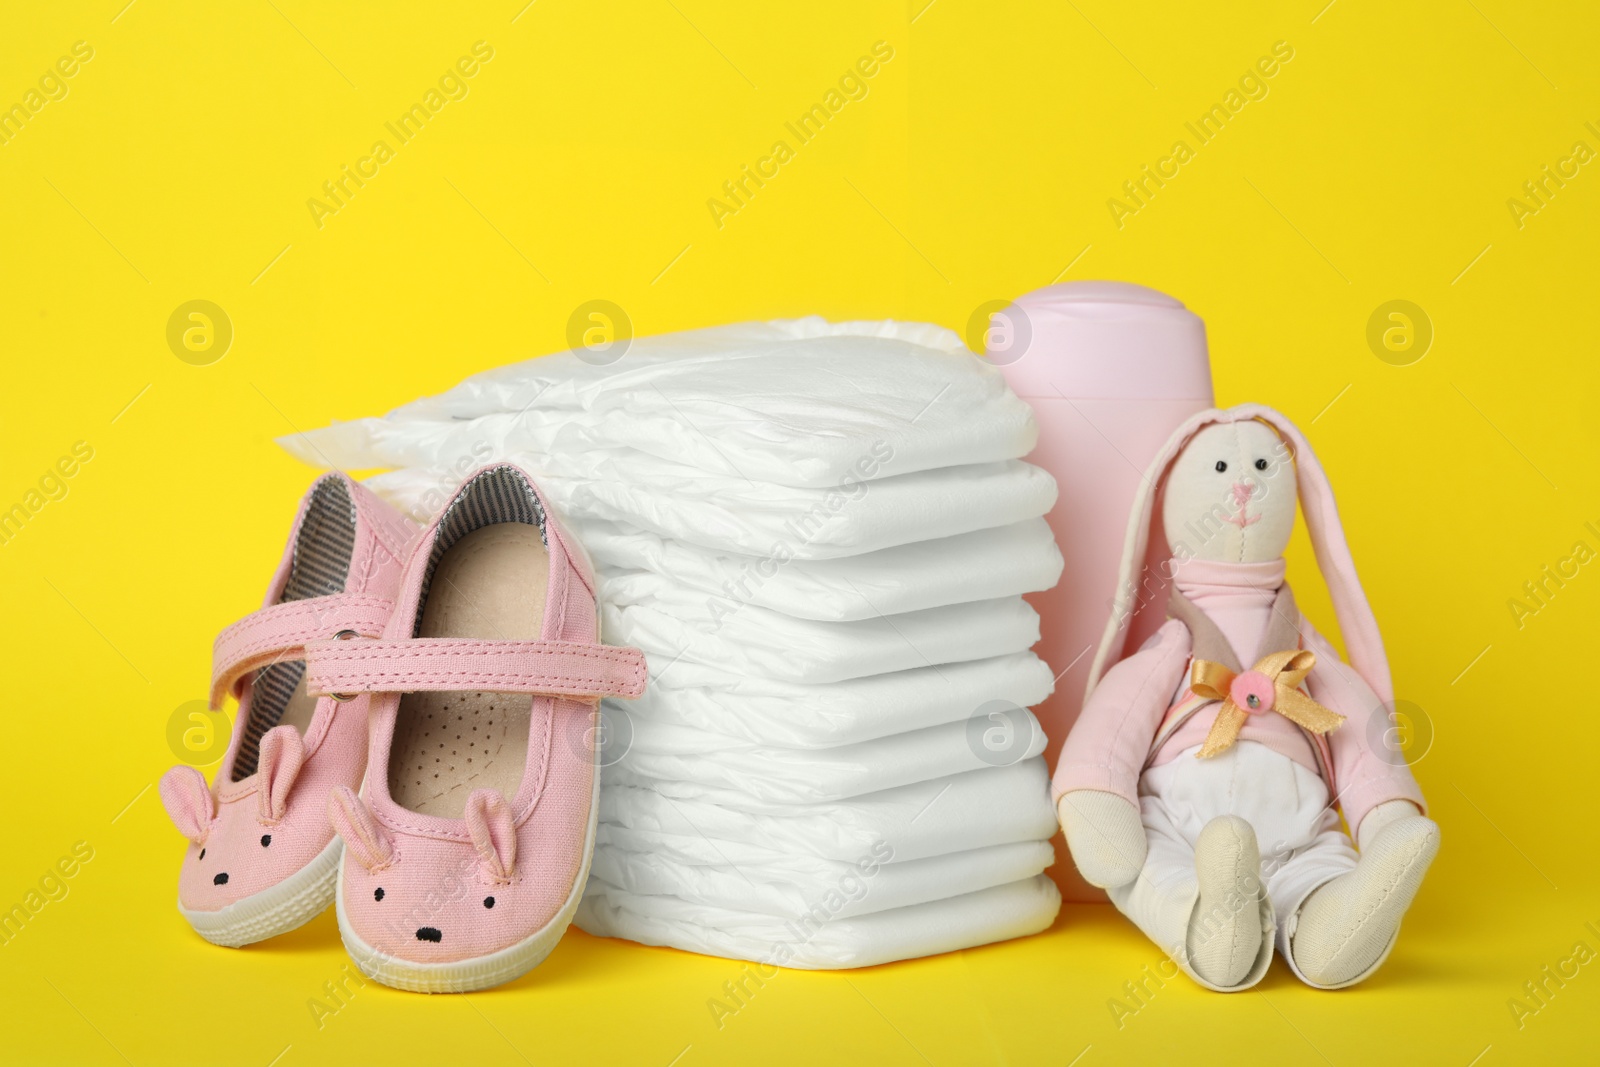 Photo of Diapers and baby accessories on yellow background